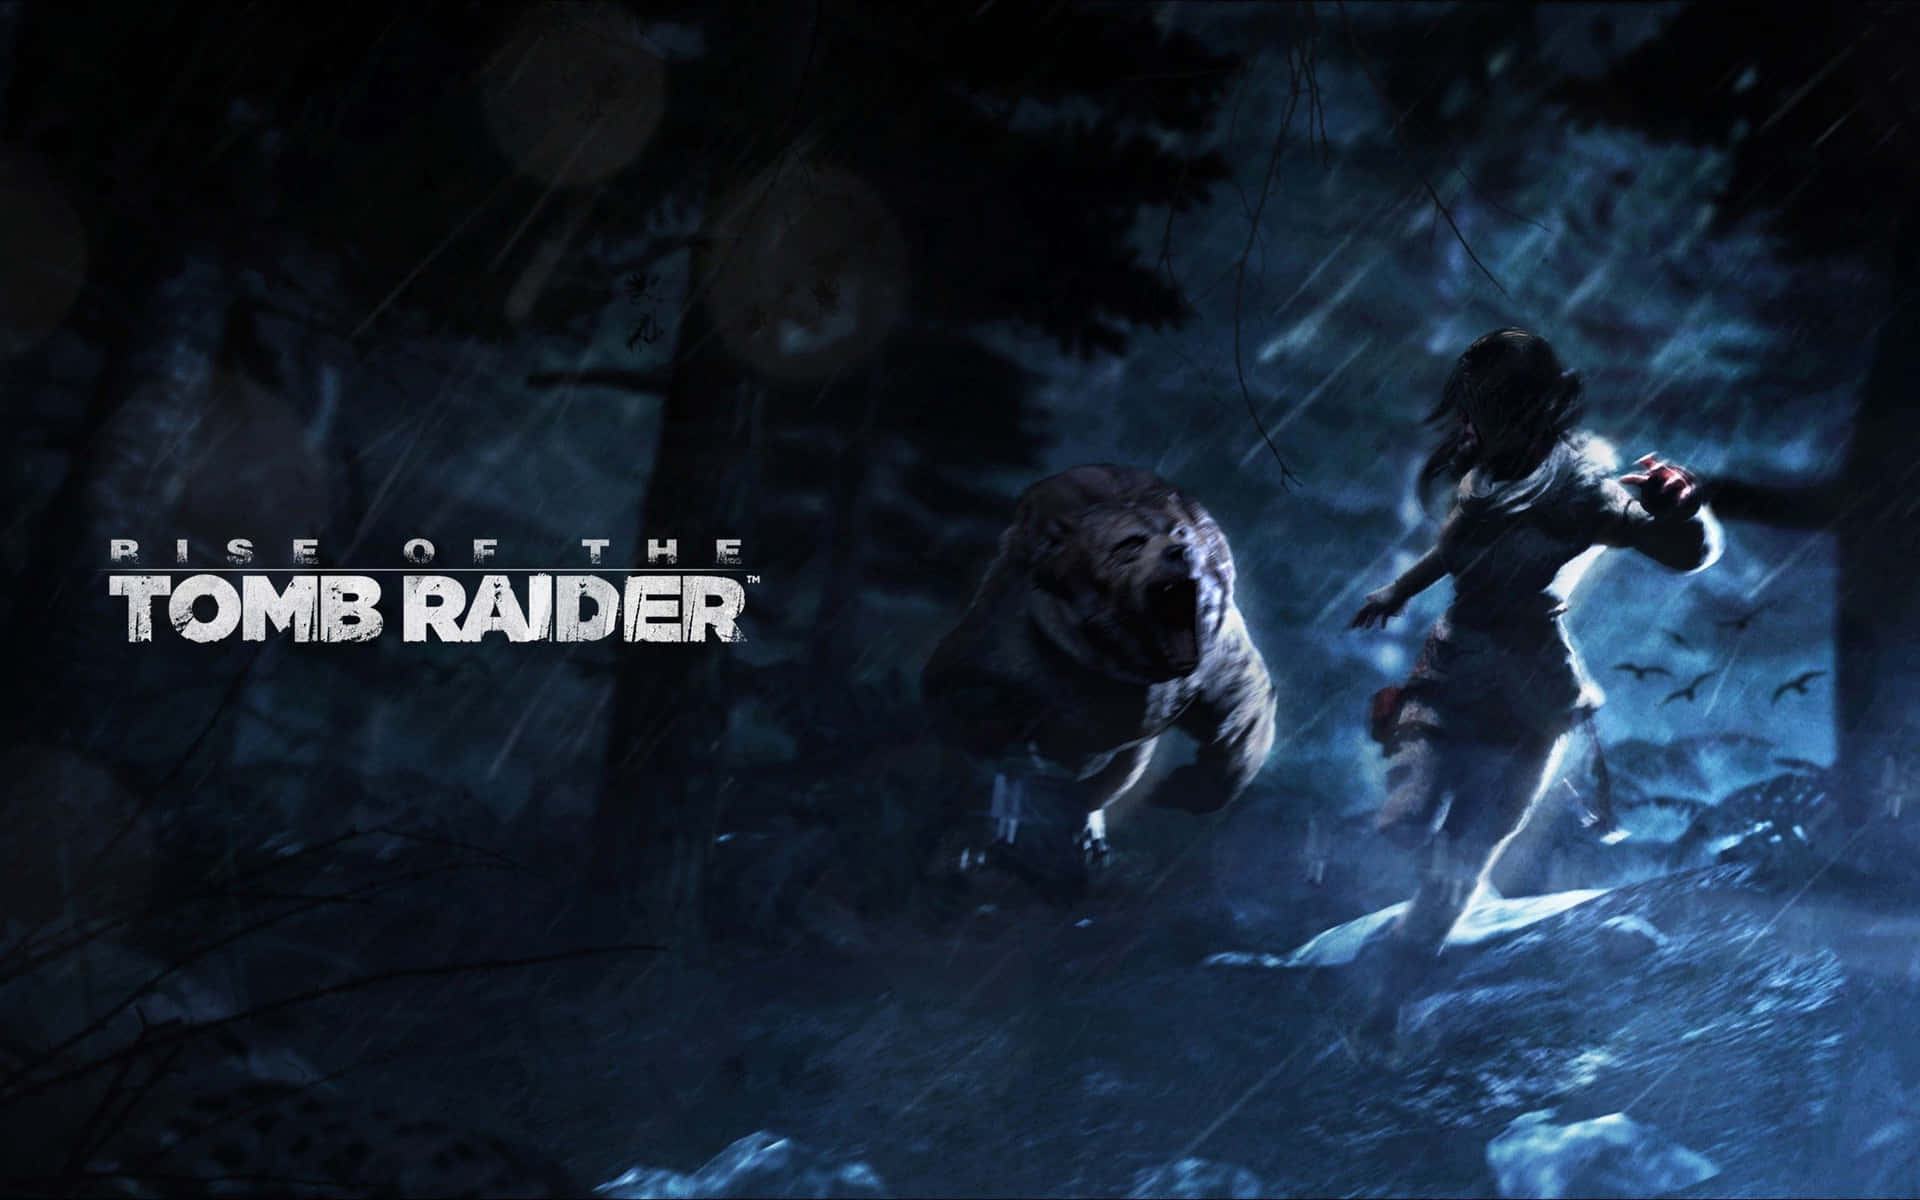 Experience a thrilling new adventure with Rise of the Tomb Raider. Wallpaper